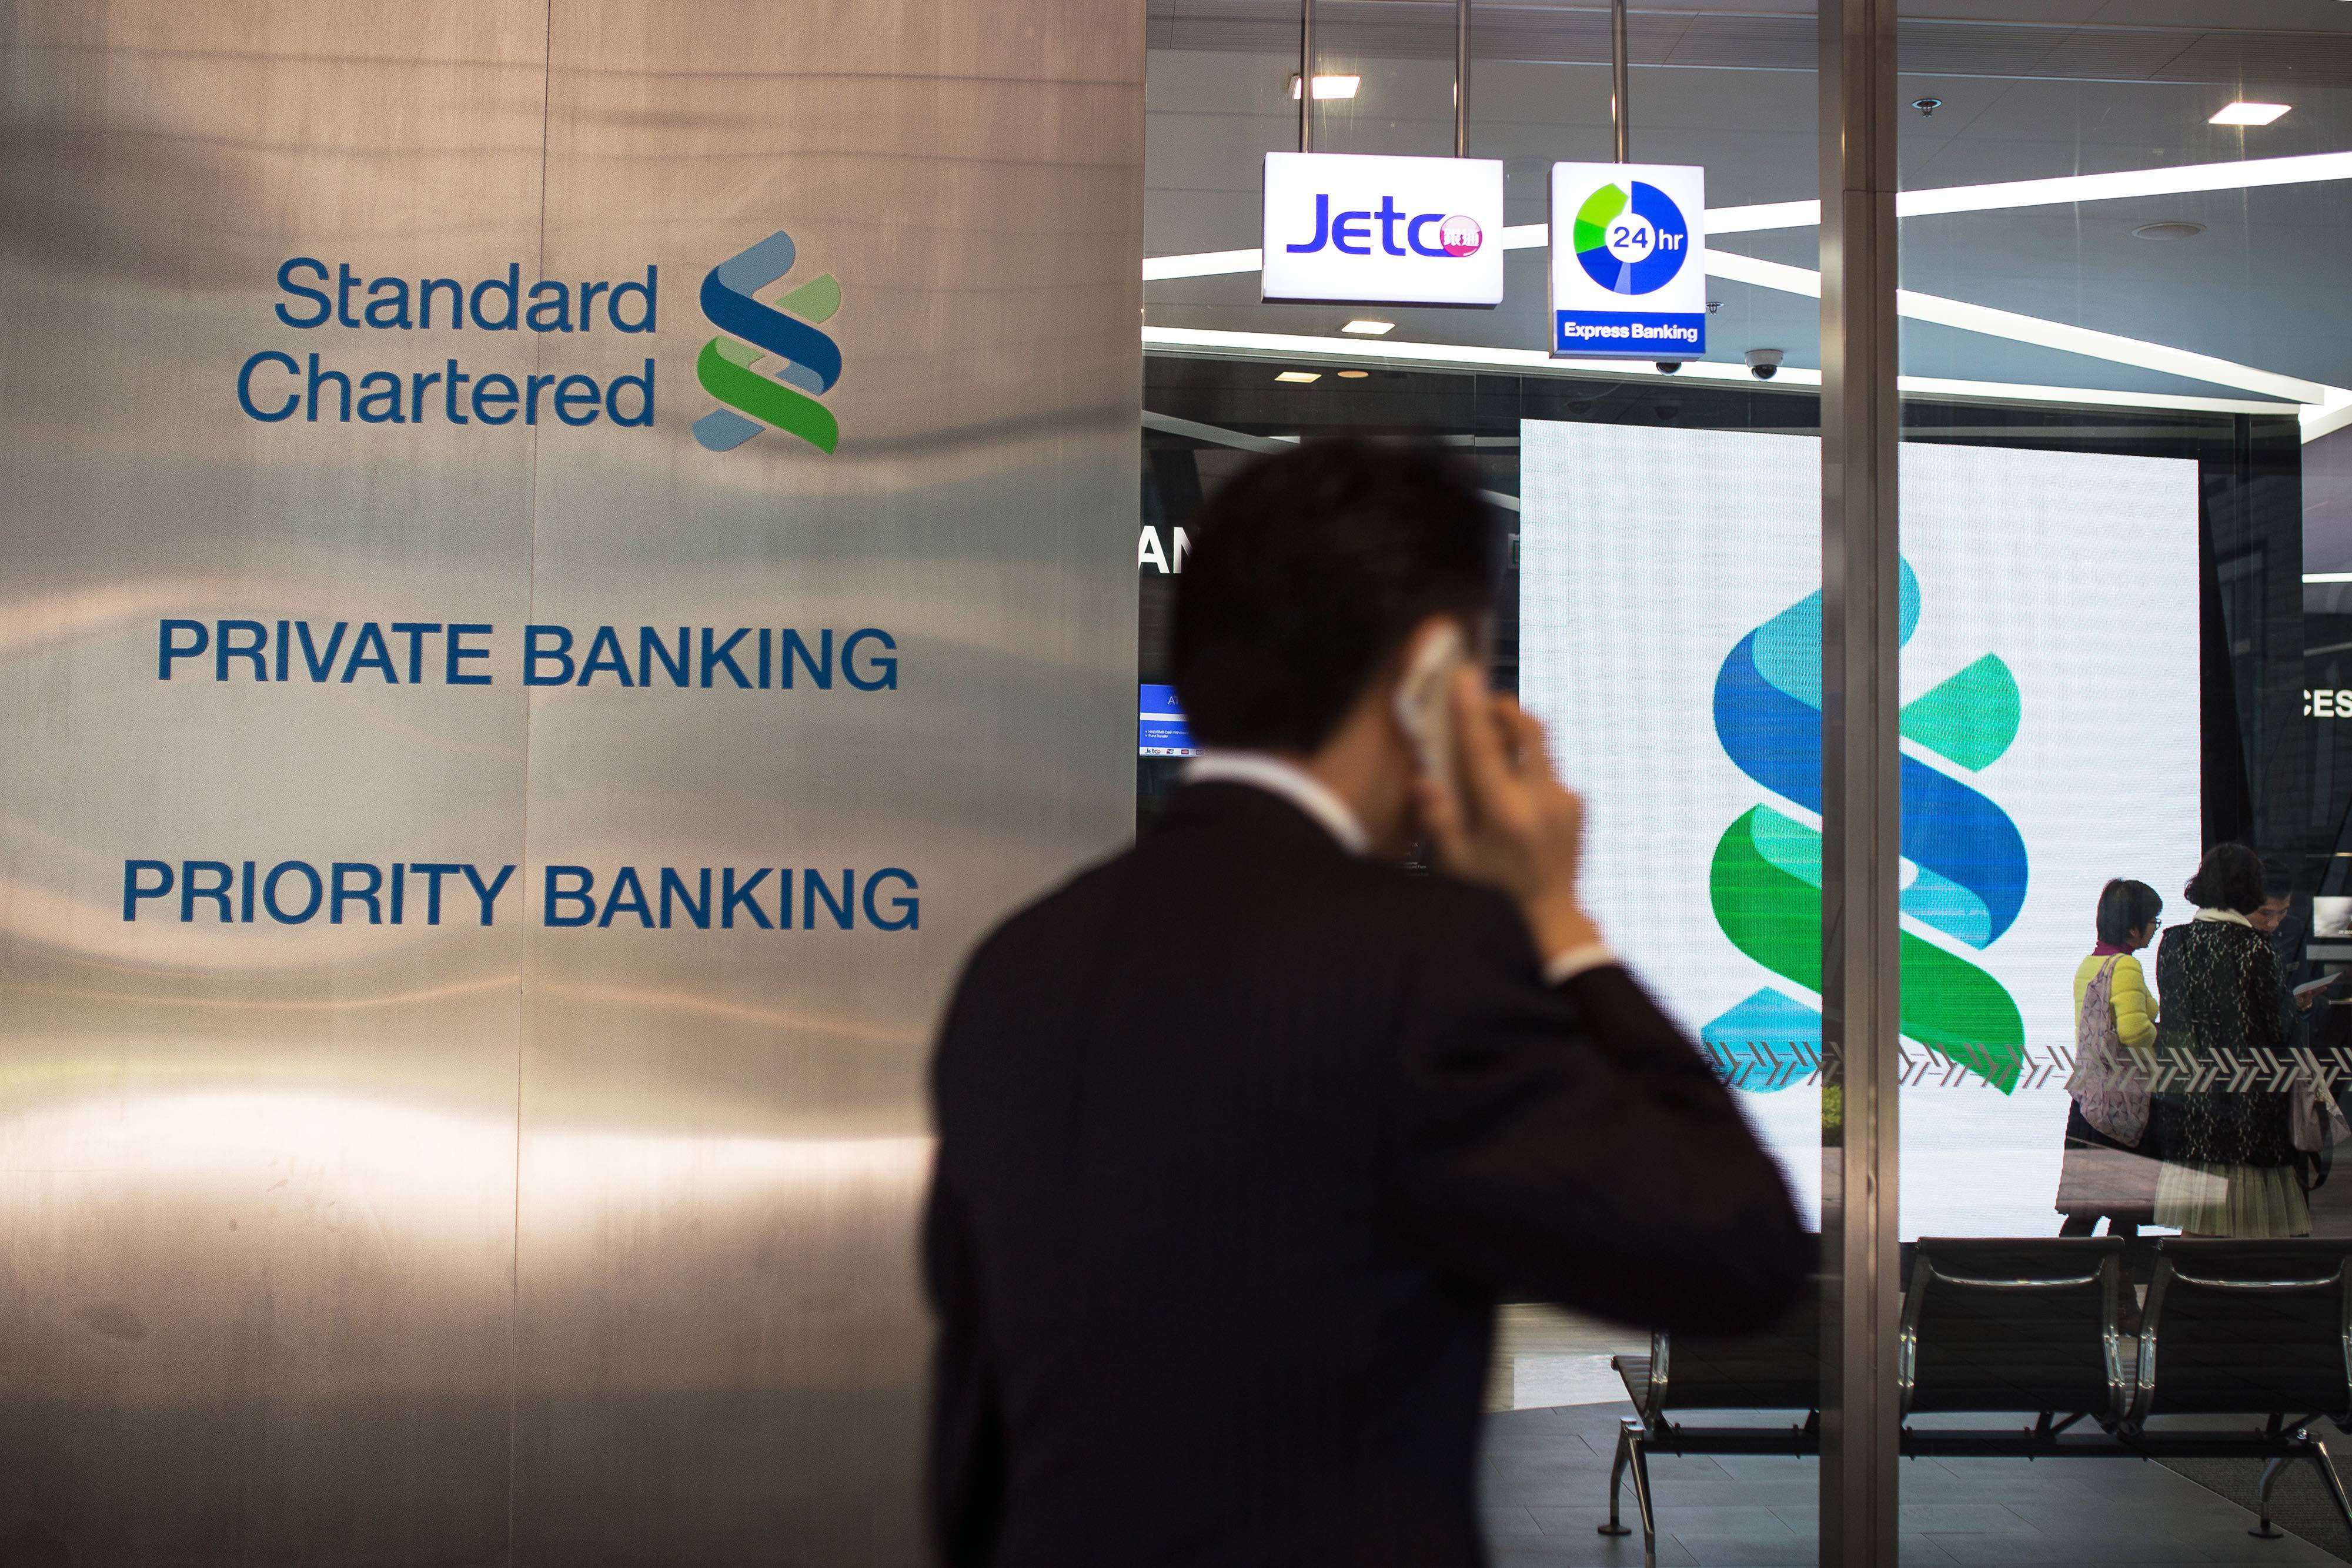 Standard Chartered Reports Jump in Profit during Q1 2021